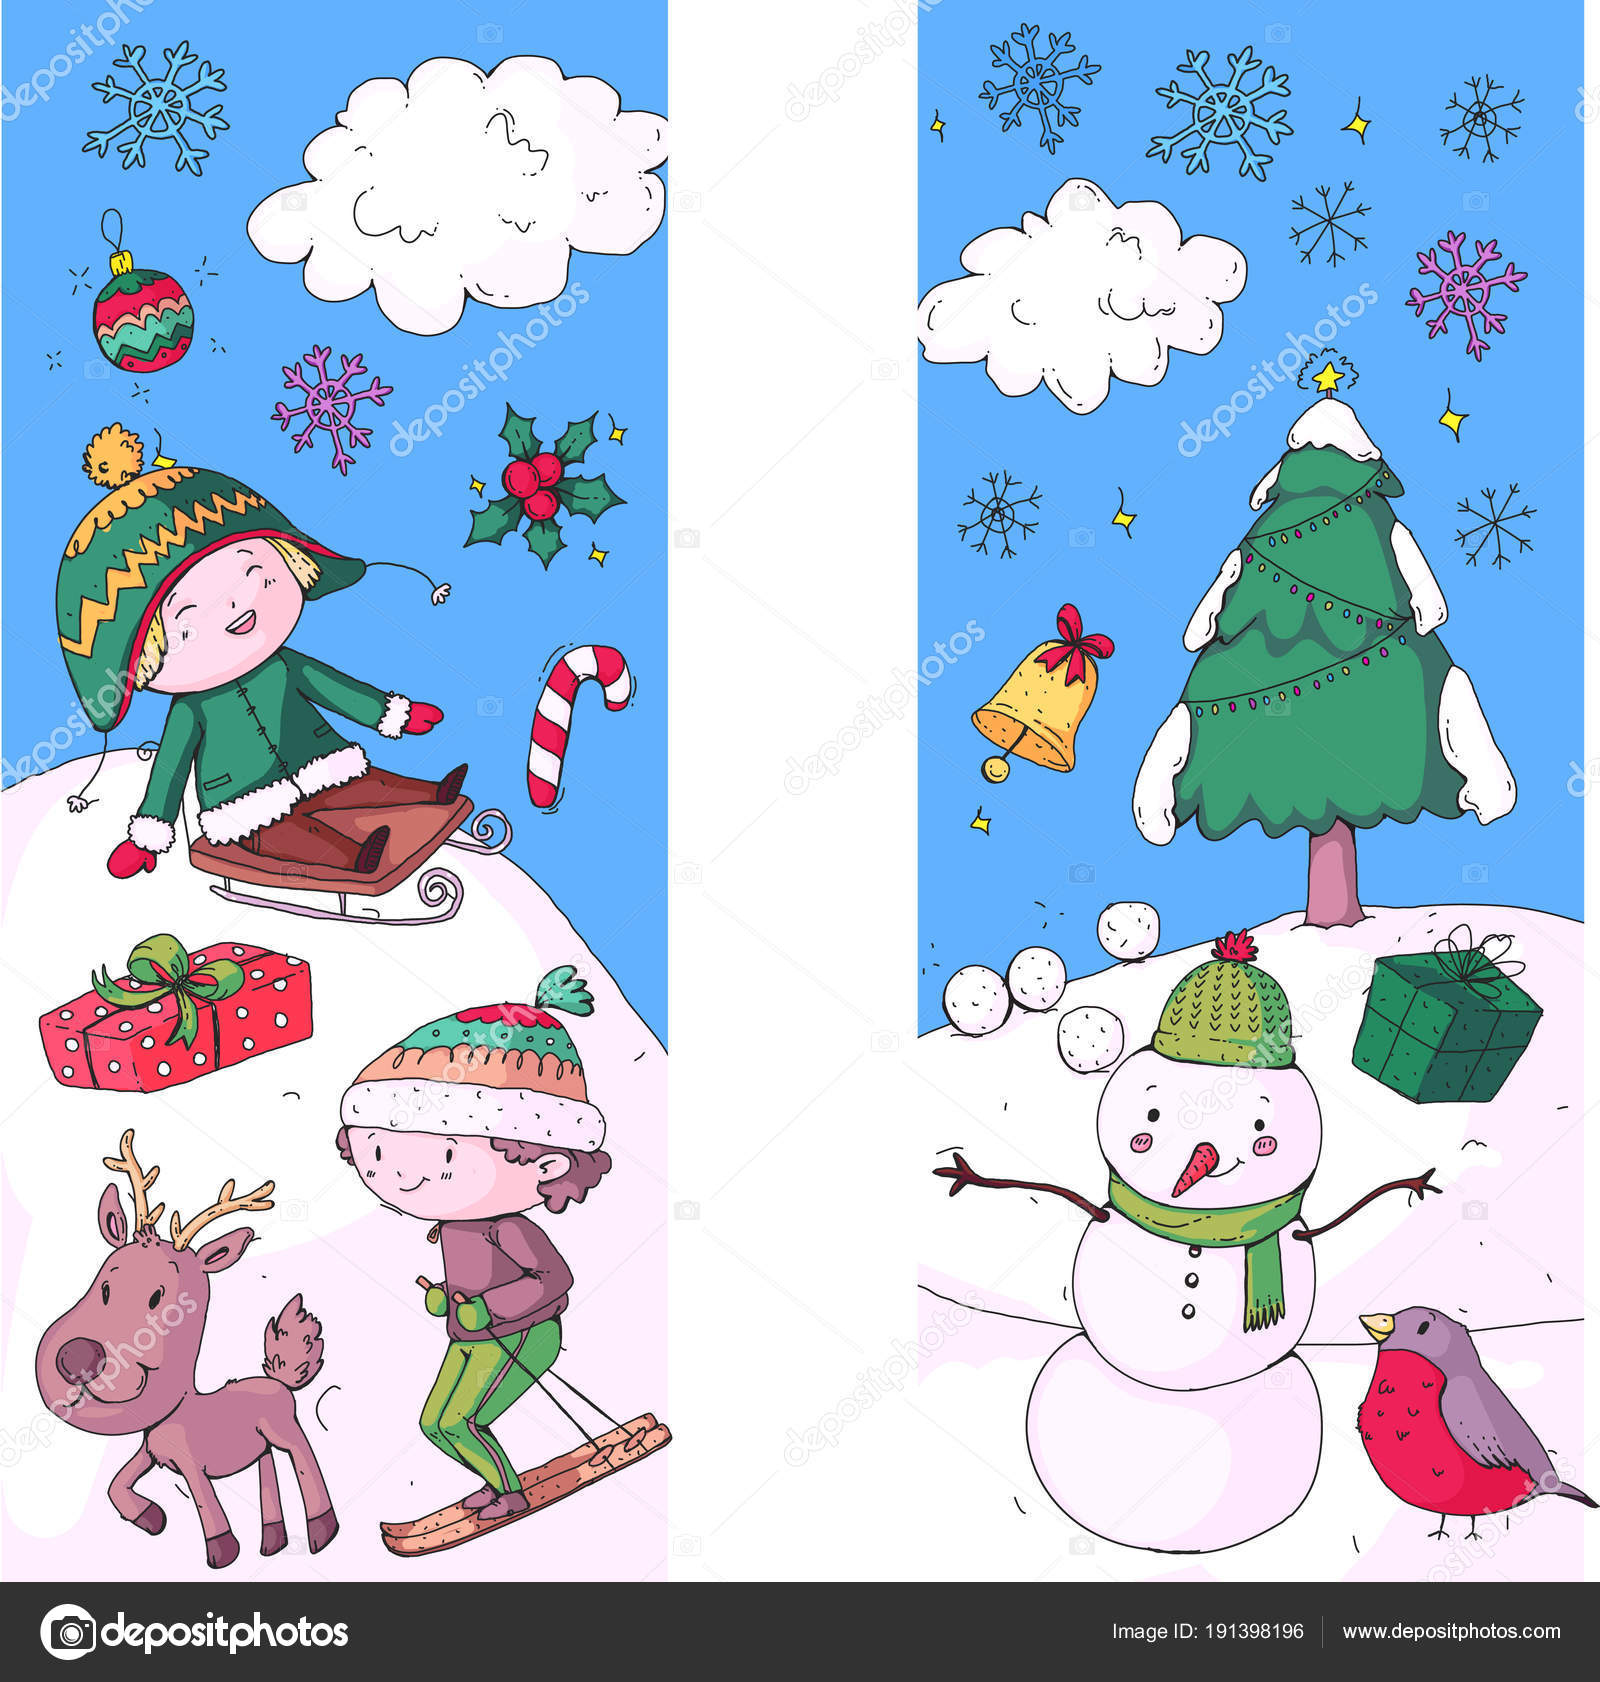 Merry Christmas Celebration With Children Kids Drawing Illustration With Ski Gifts Santa Claus Snowman Boys And Girls Play And Have Fun School And Kindergarten Preschool Children Stock Vector C Helen F 191398196